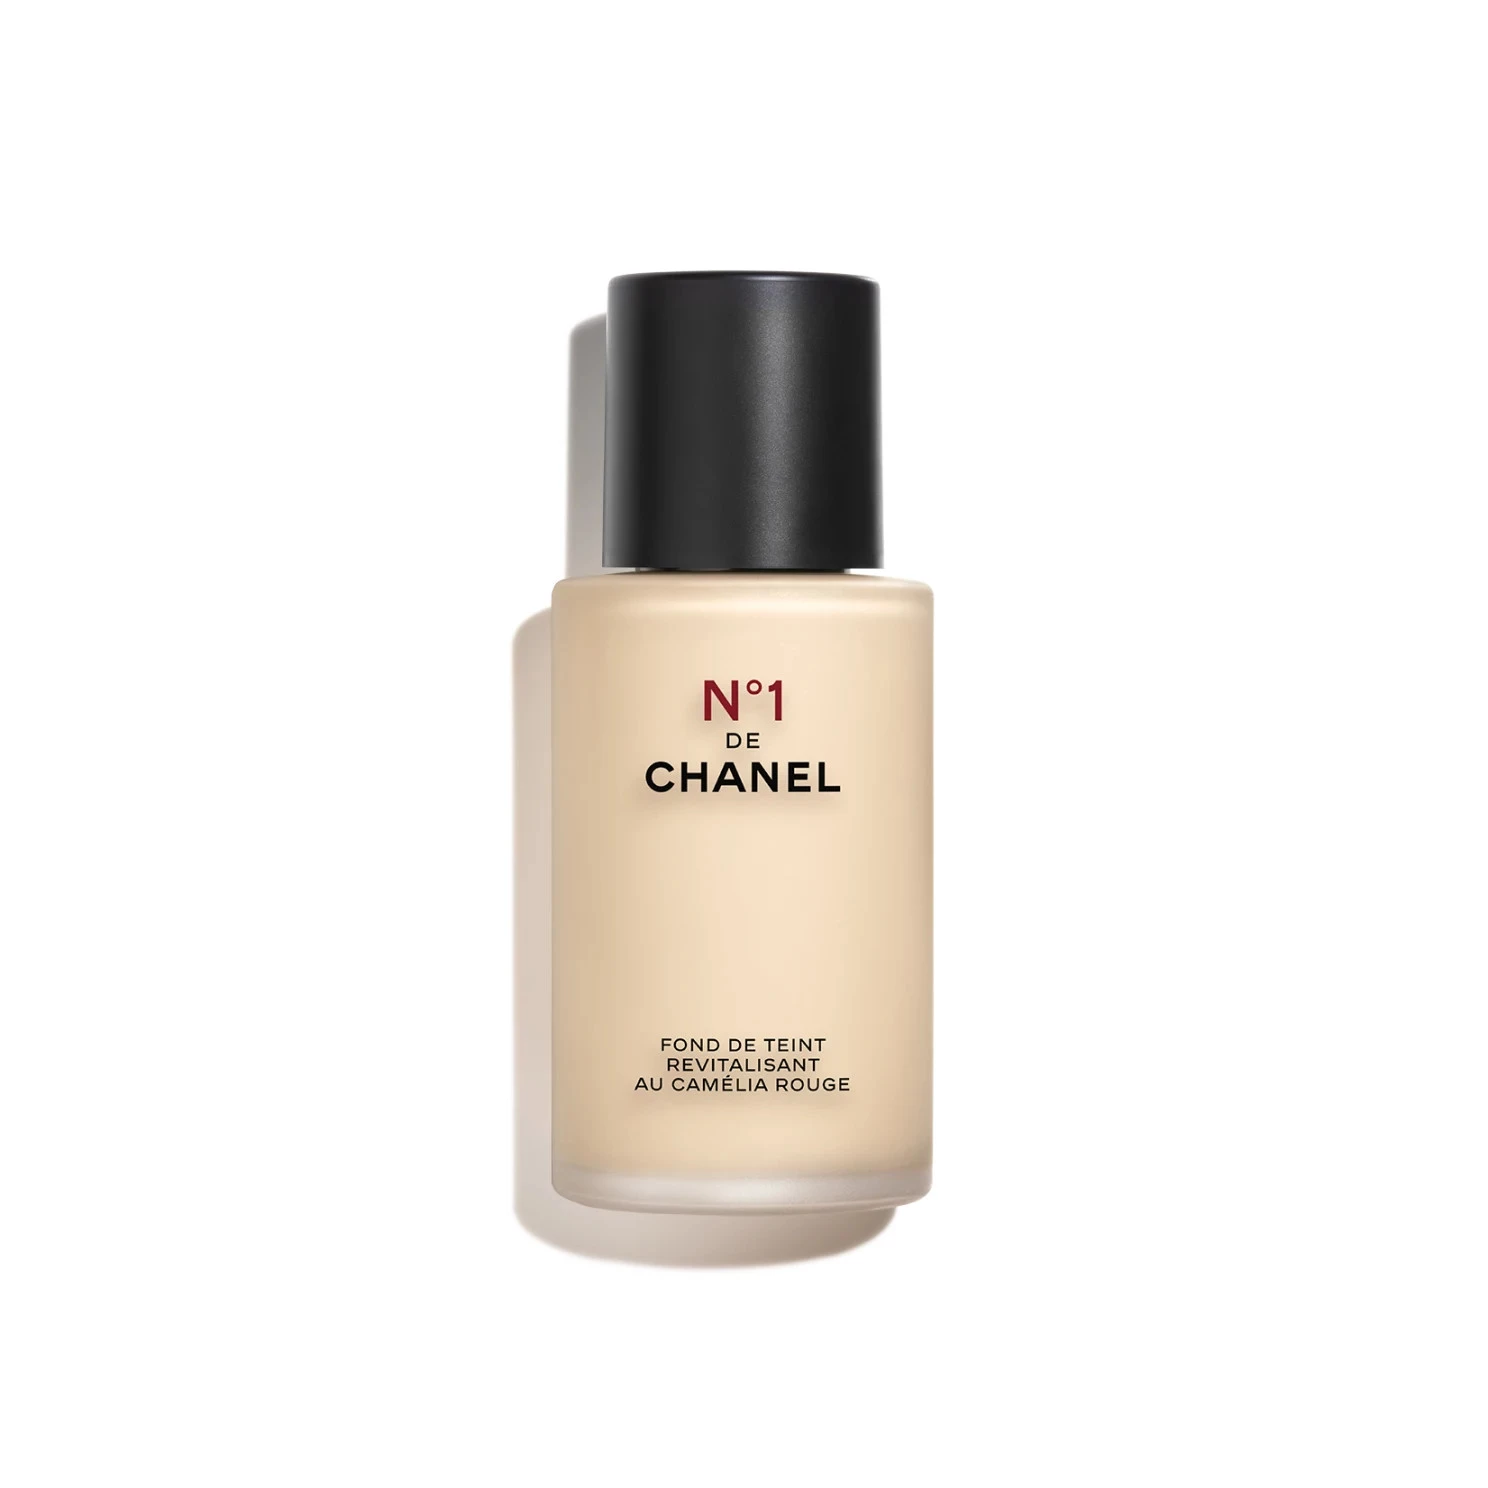 N1 DE CHANEL REVITALIZING SERUM Prevents And Corrects The